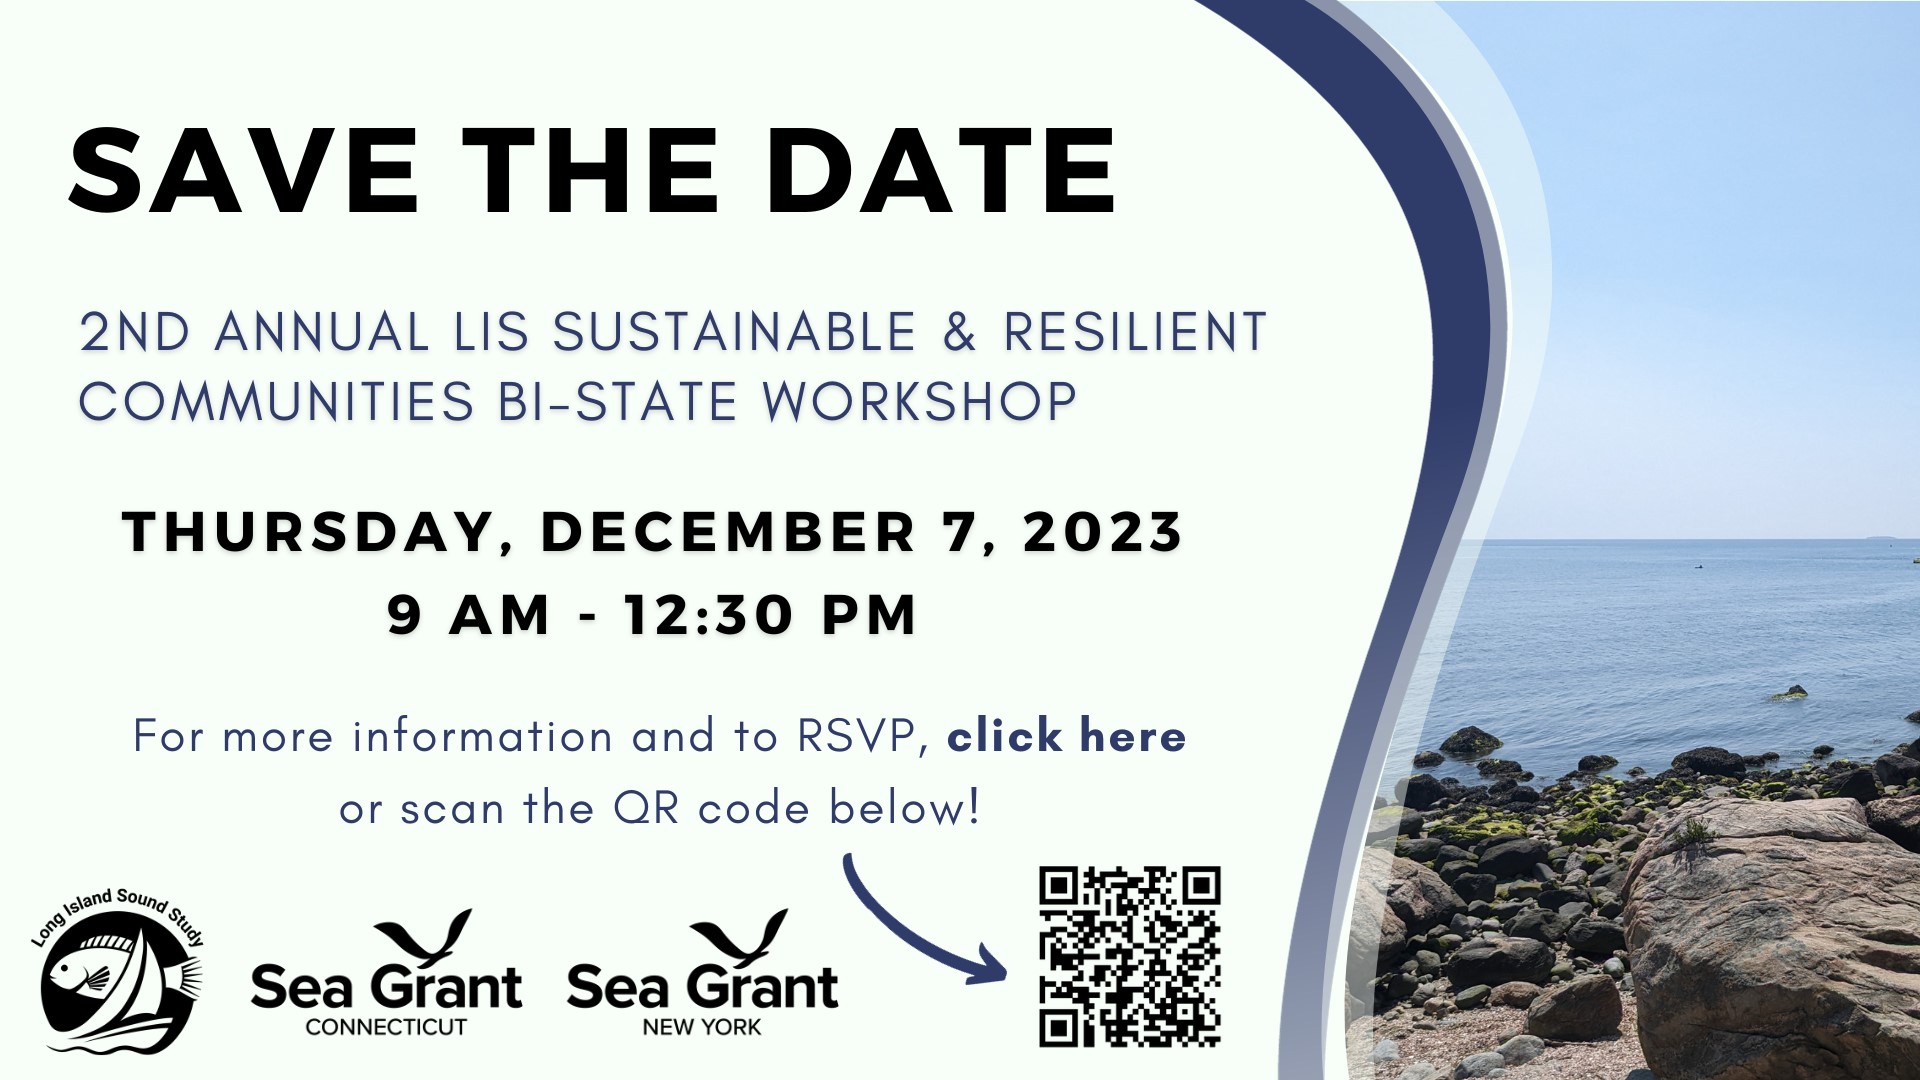 This is a graphic of a flier for the Dec 7 sustainable and resilient communites workshop for Dec. 7, 2023. It includes a qr code to link for more information and to register https://cornell.zoom.us/webinar/register/WN_U4u4wx1iRQOvAcfT8ZM_Ww